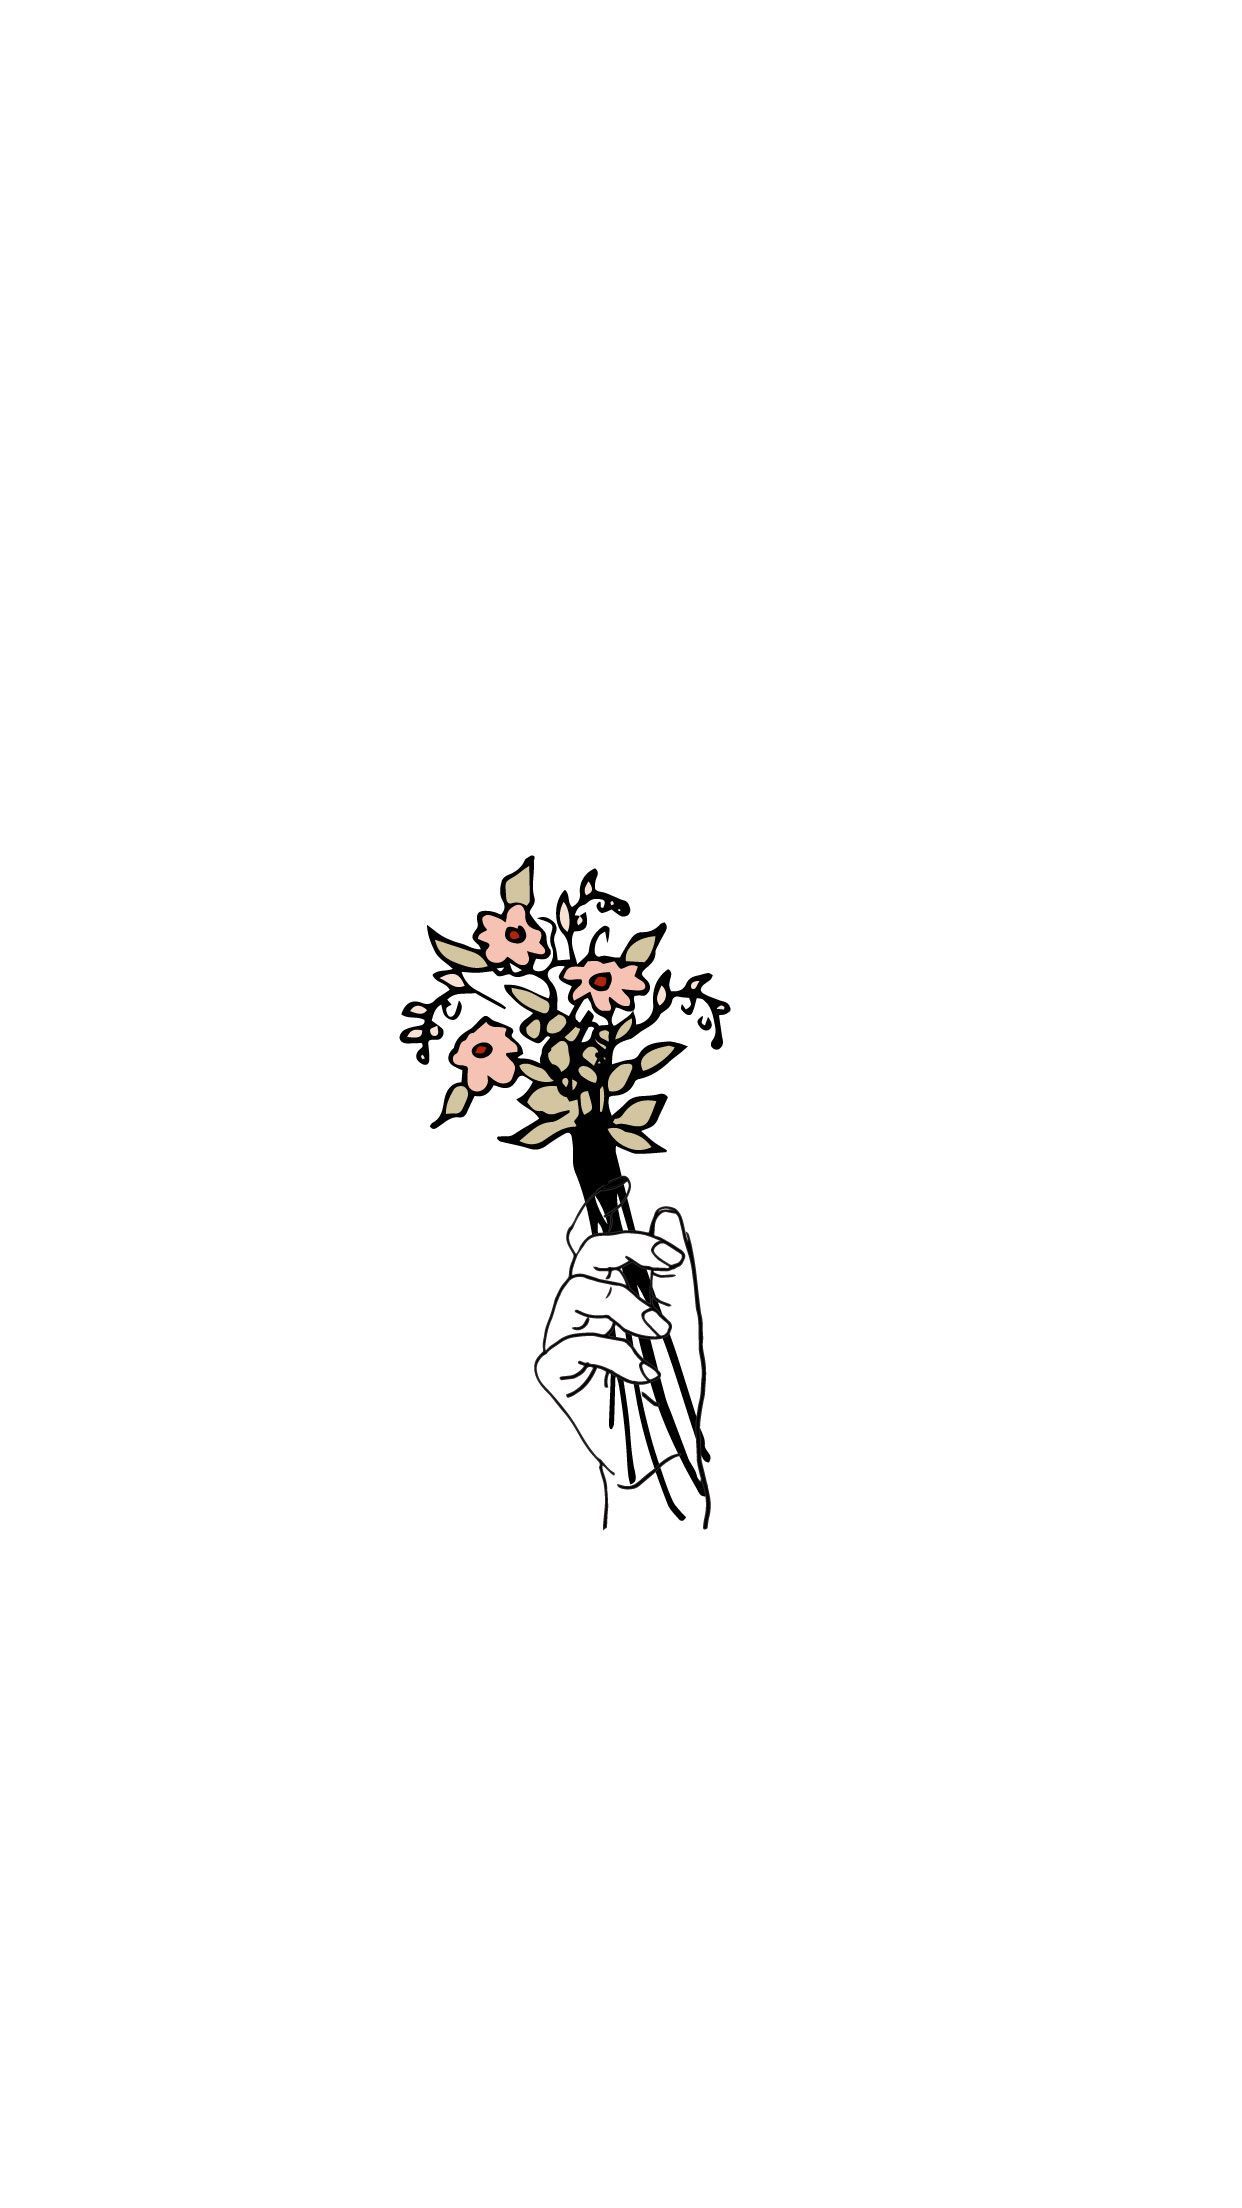 Aesthetic wallpaper hand holding flowers - Simple